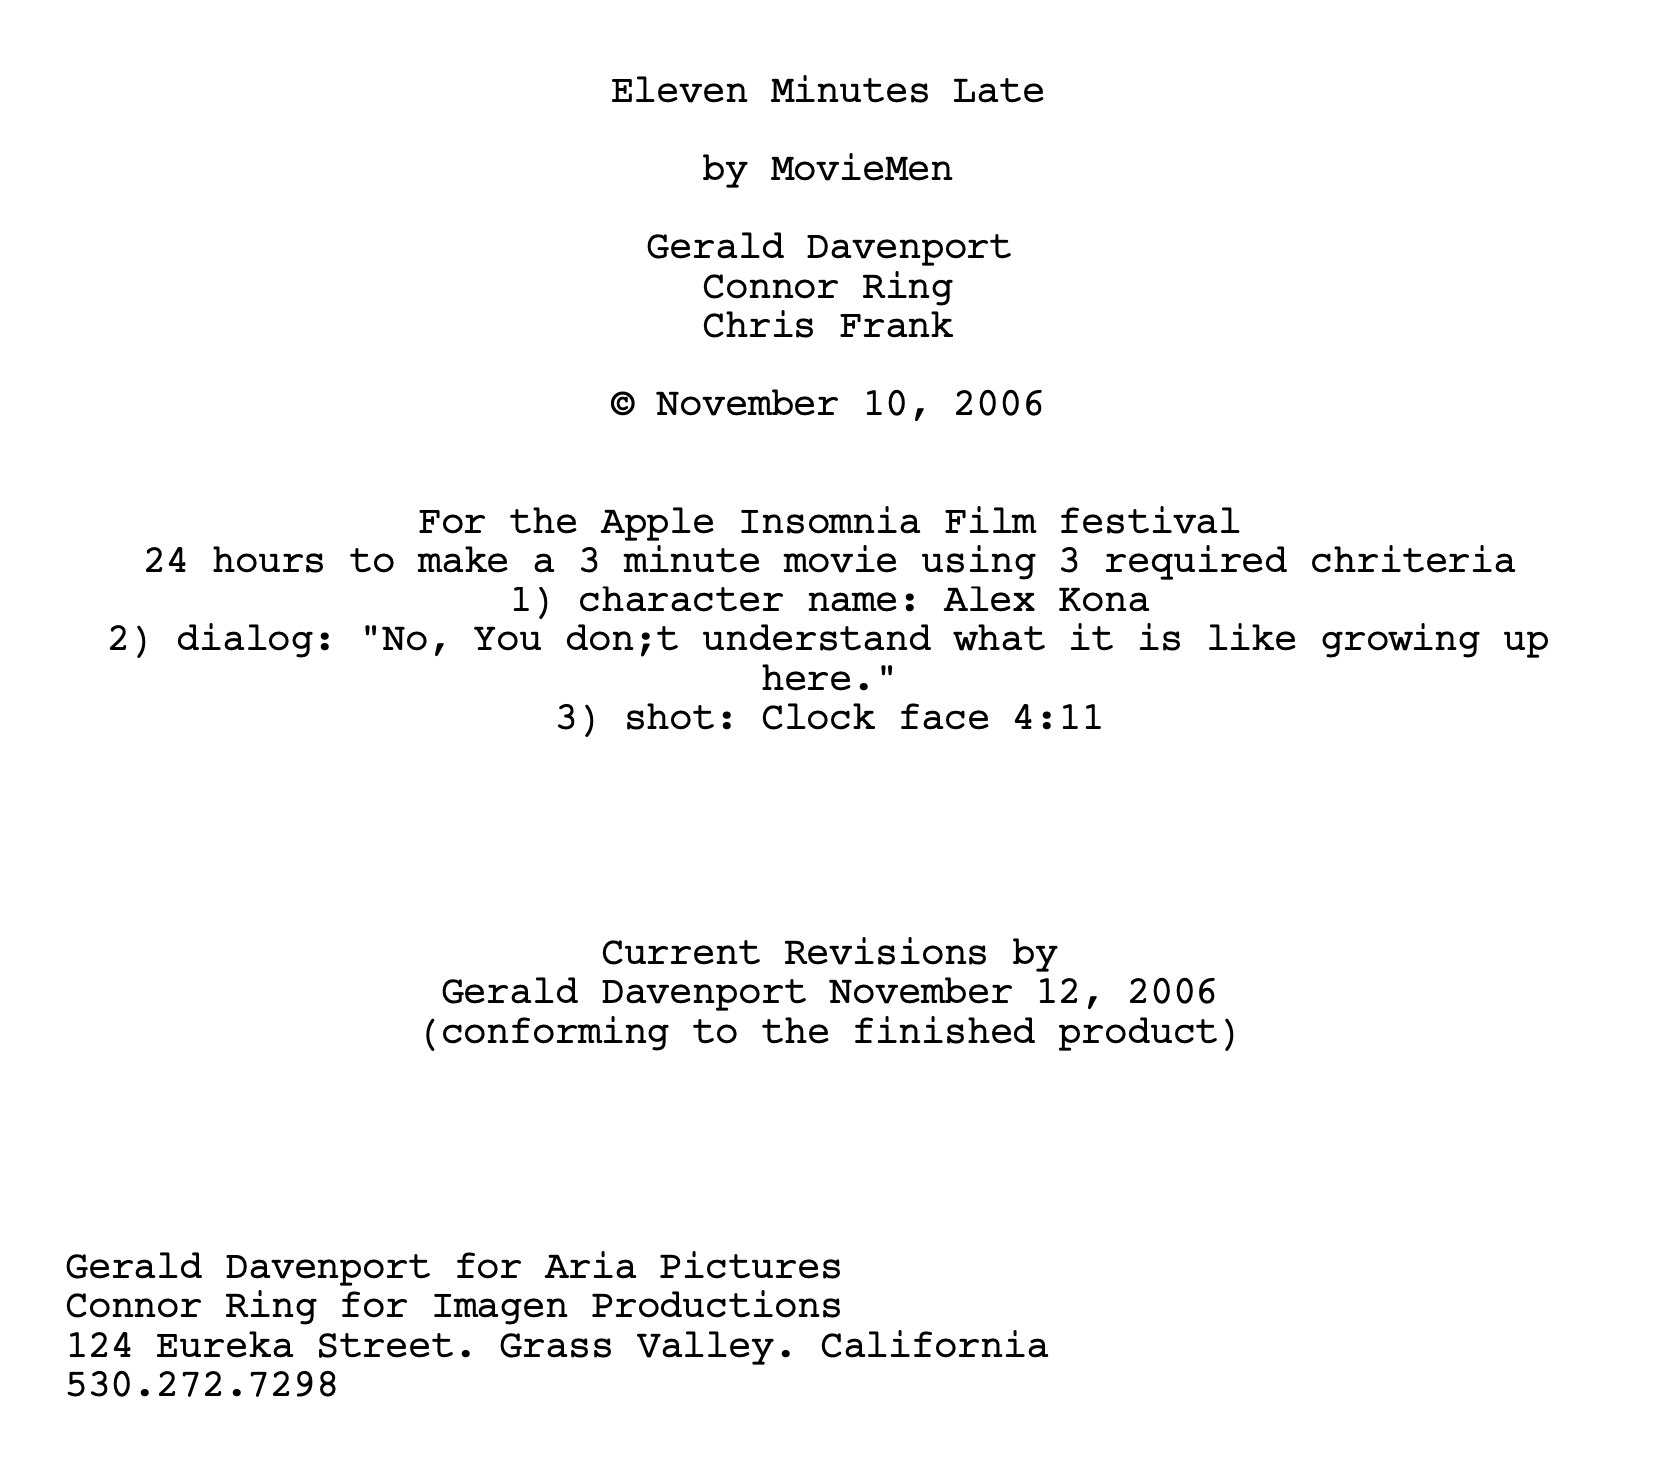 Eleven Minutes Late (2006) title page of the screenplay.